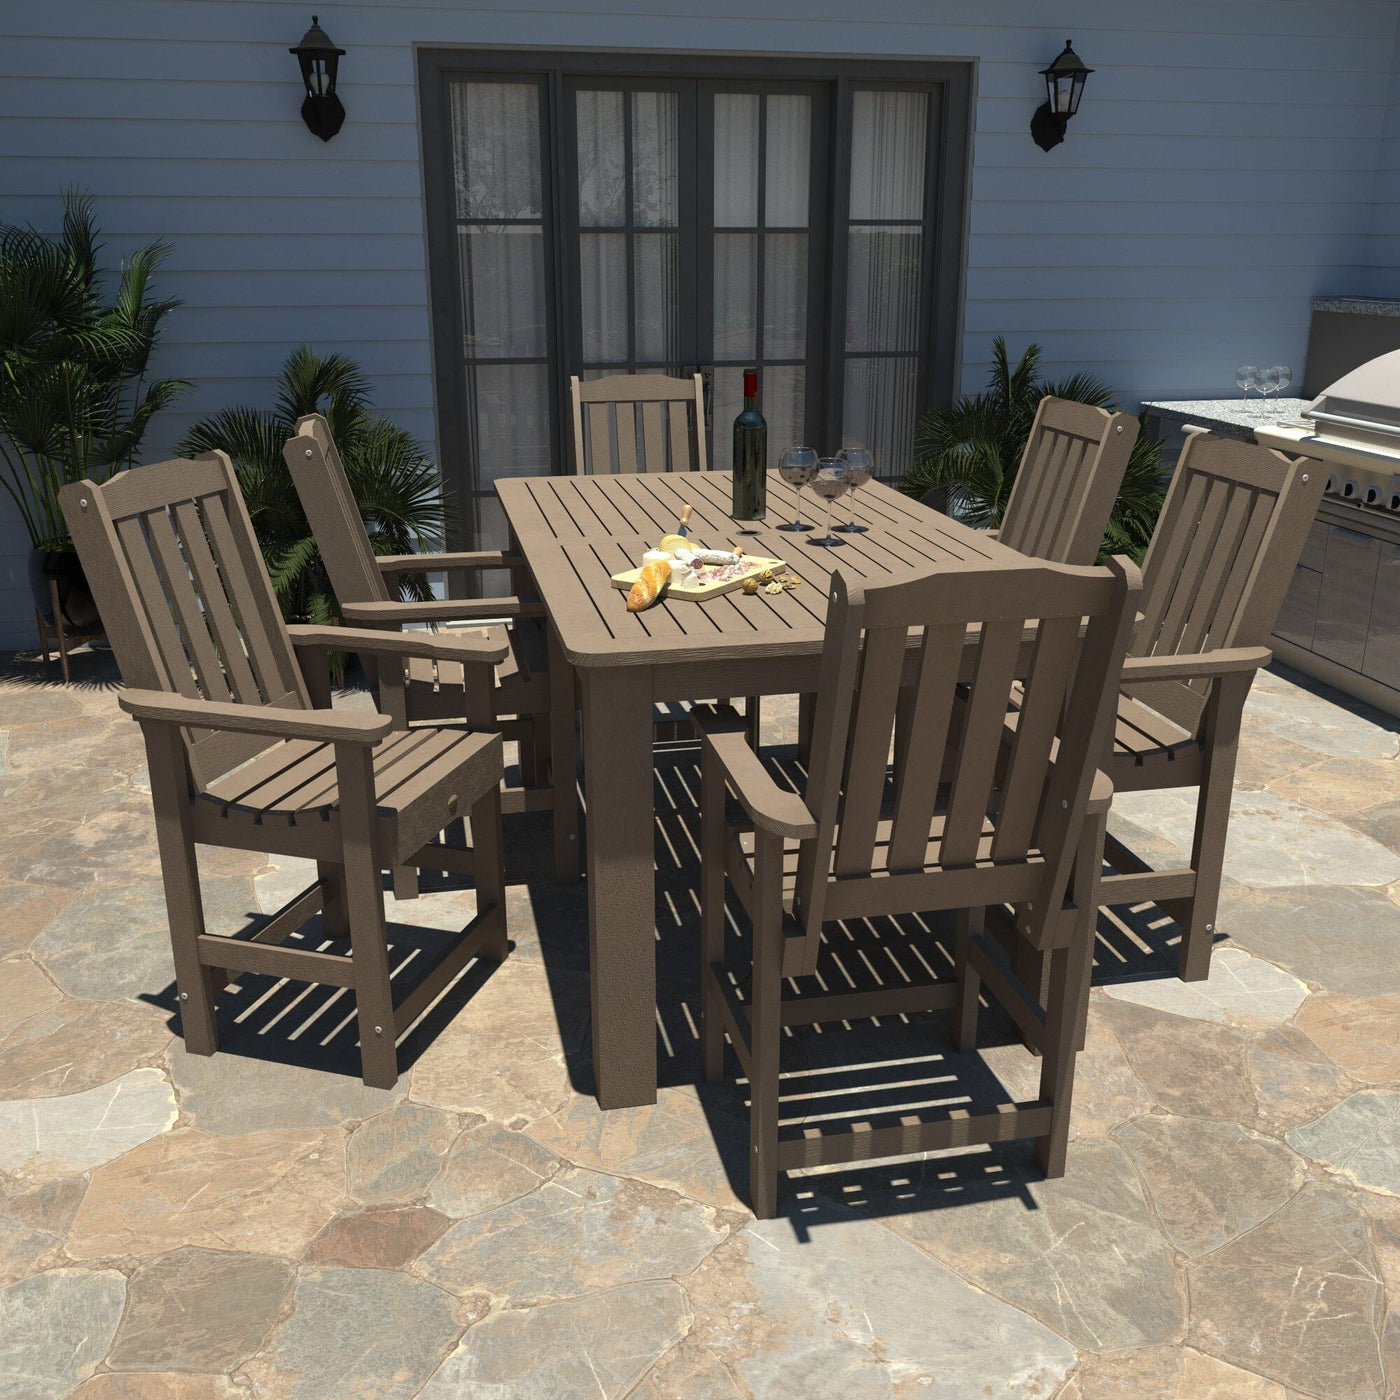 Lehigh 7pc Rectangular Outdoor Dining Set 42in x 72in - Counter Height Dining Highwood USA 